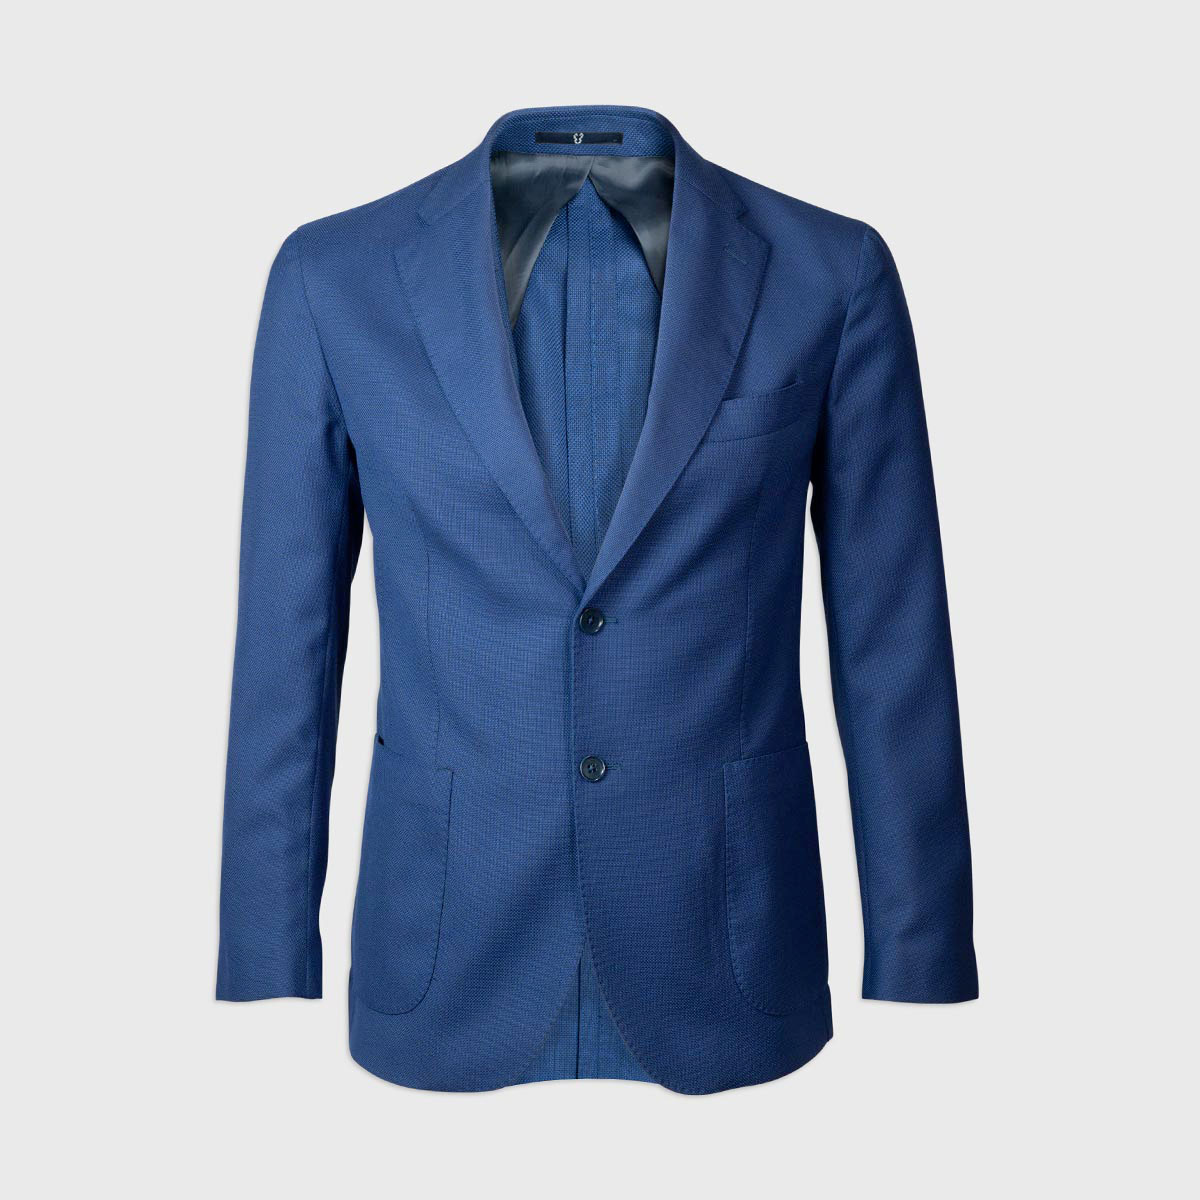 Half-lined Single-breasted jacket in Wool, Silk and Linen – Navy Melillo 1970 on sale 2022